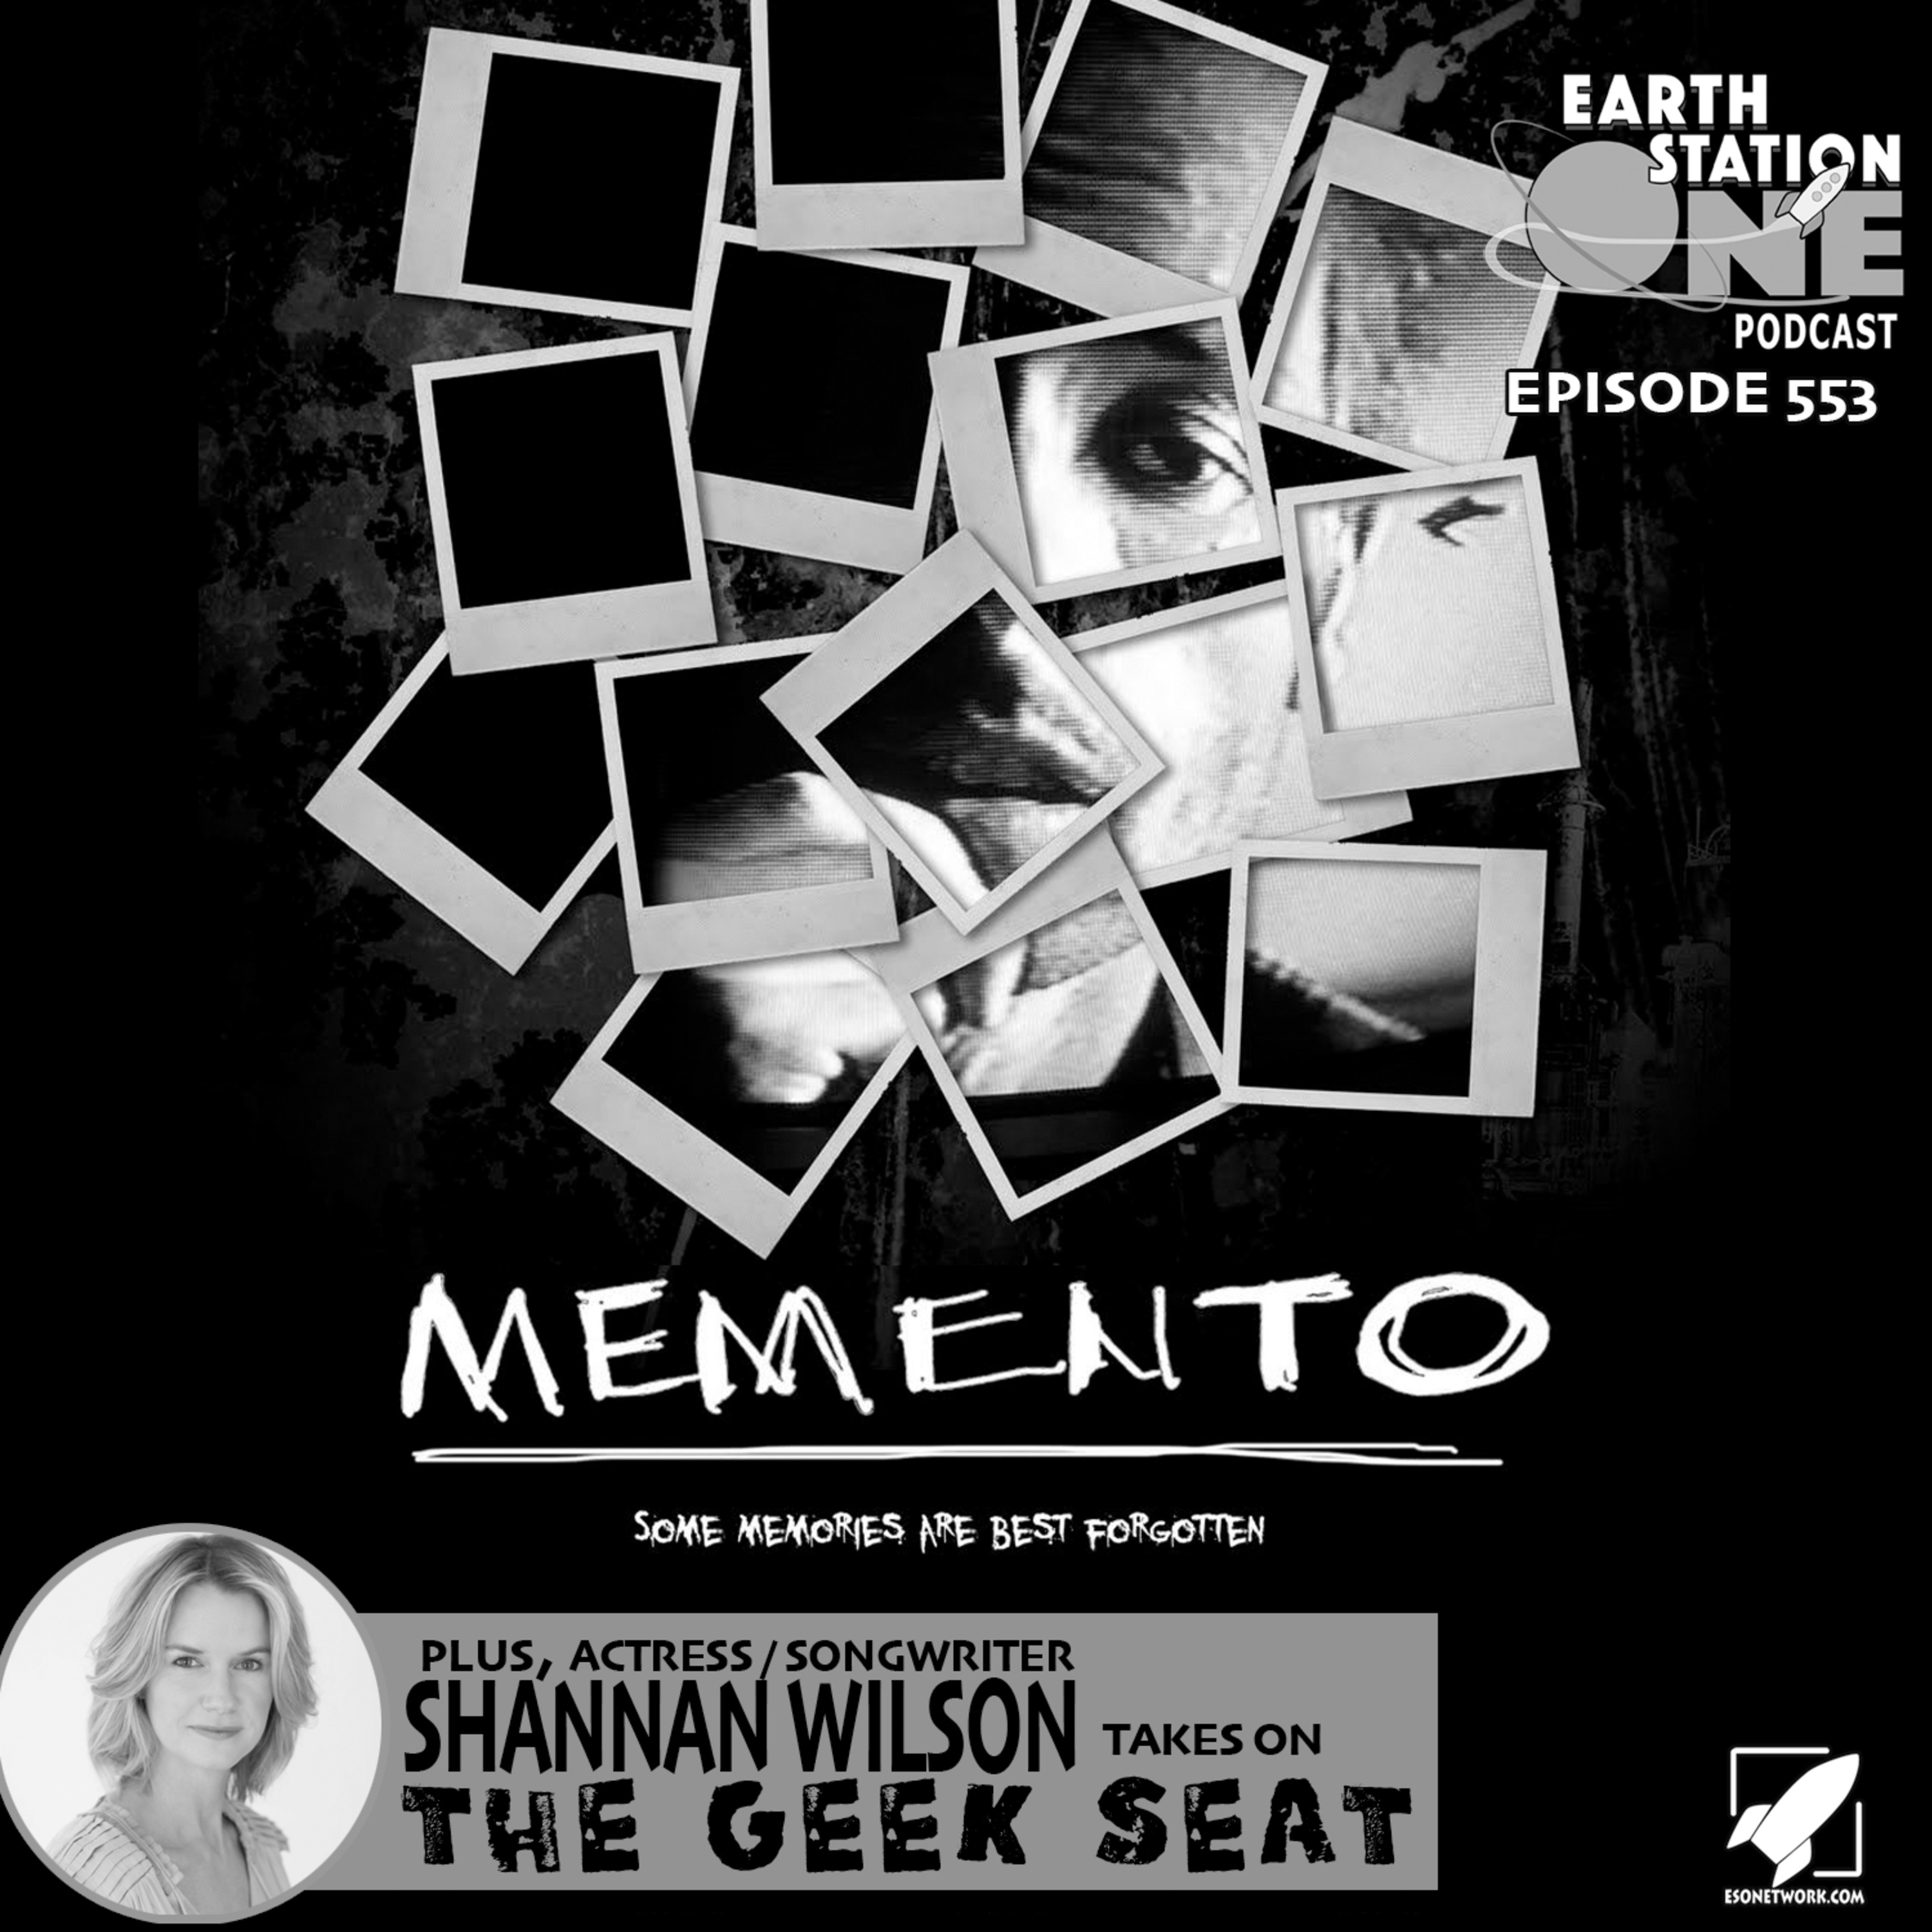 The Earth Station One Podcast - The 20th Anniversary of Memento